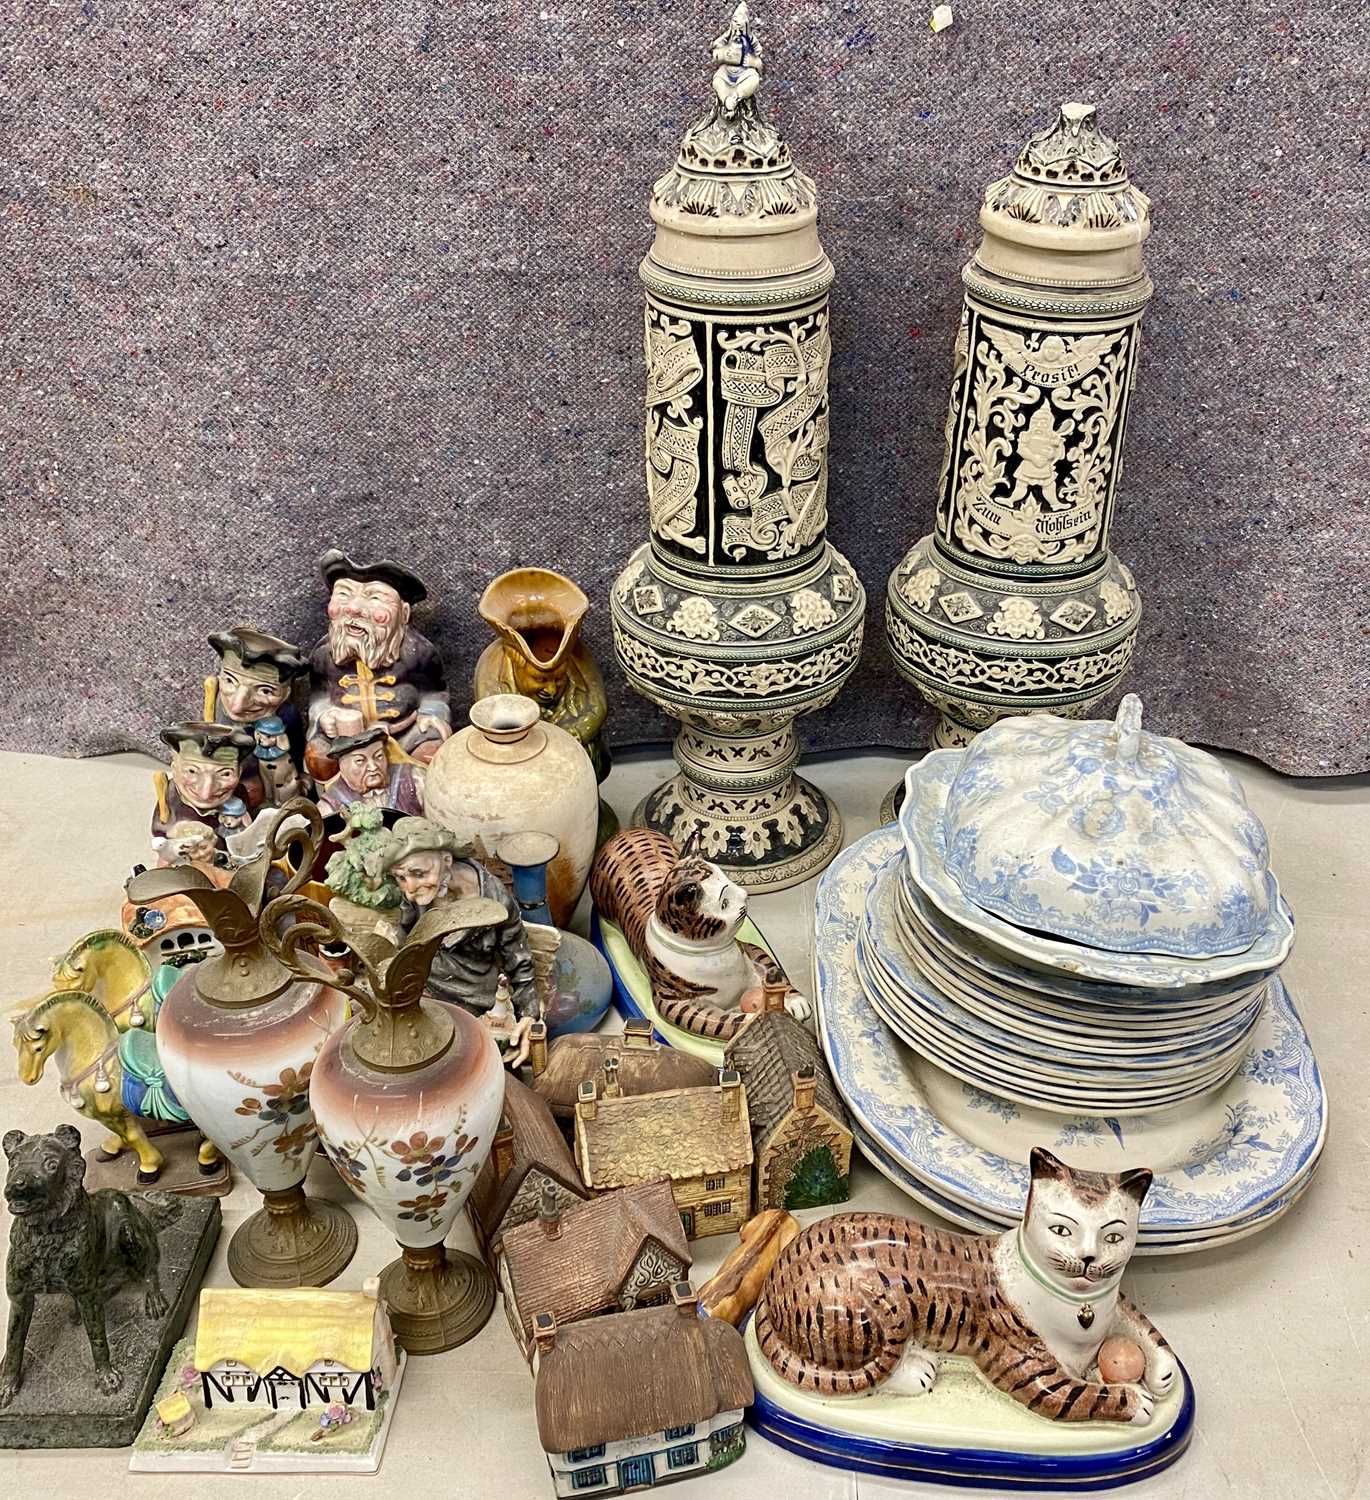 LARGE GROUP OF BRITISH & EUROPEAN CERAMICS, 19th century and later, including a large pair of German